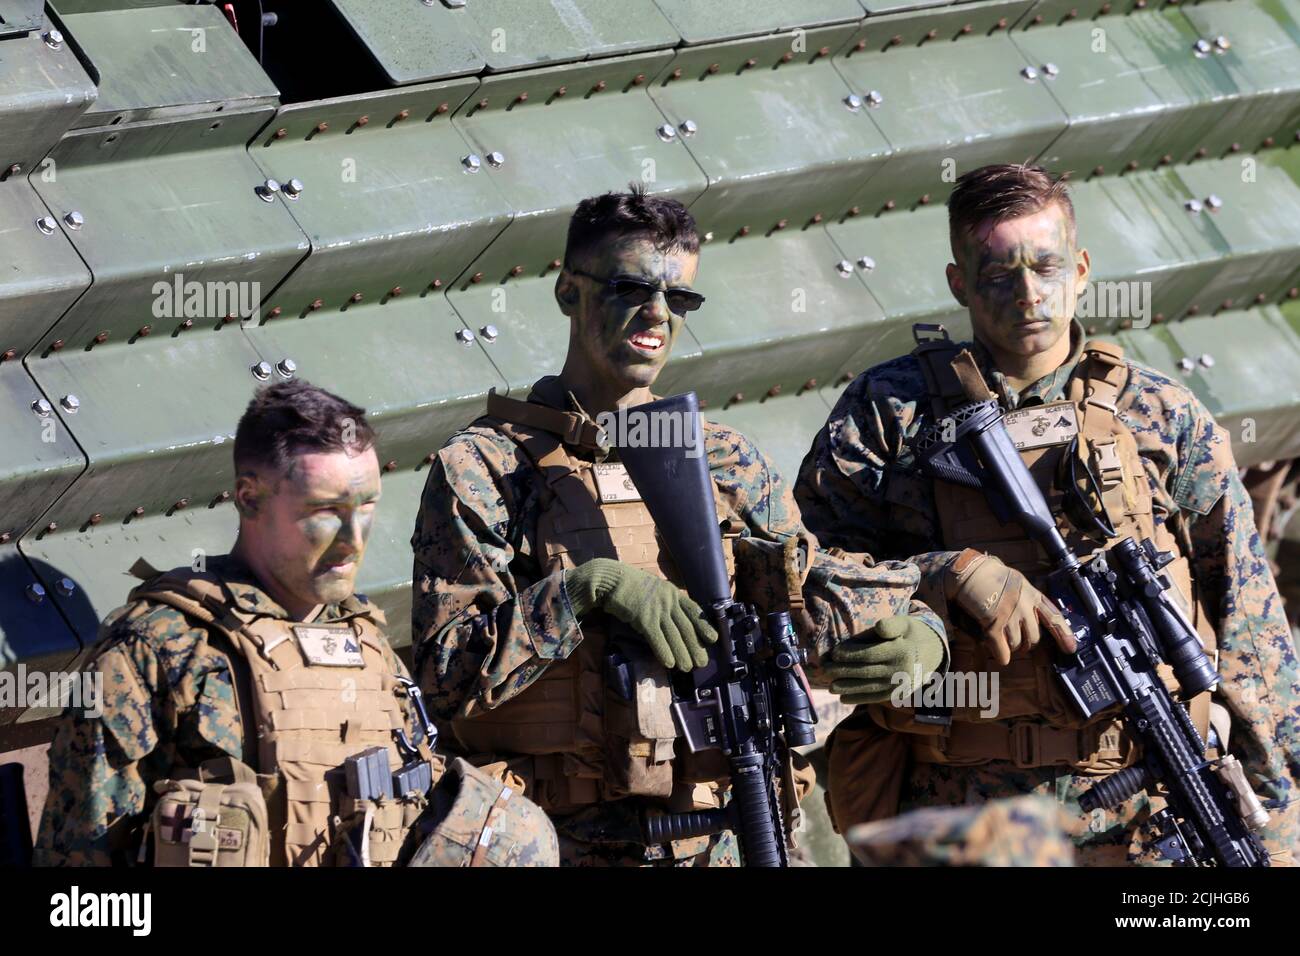 U.S. navy marines take a break during annual recurring multinational, maritime-focused NATO exercise BALTOPS 2017, near Ventspils, Latvia, June 6, 2017. REUTERS/Ints Kalnins Stock Photo